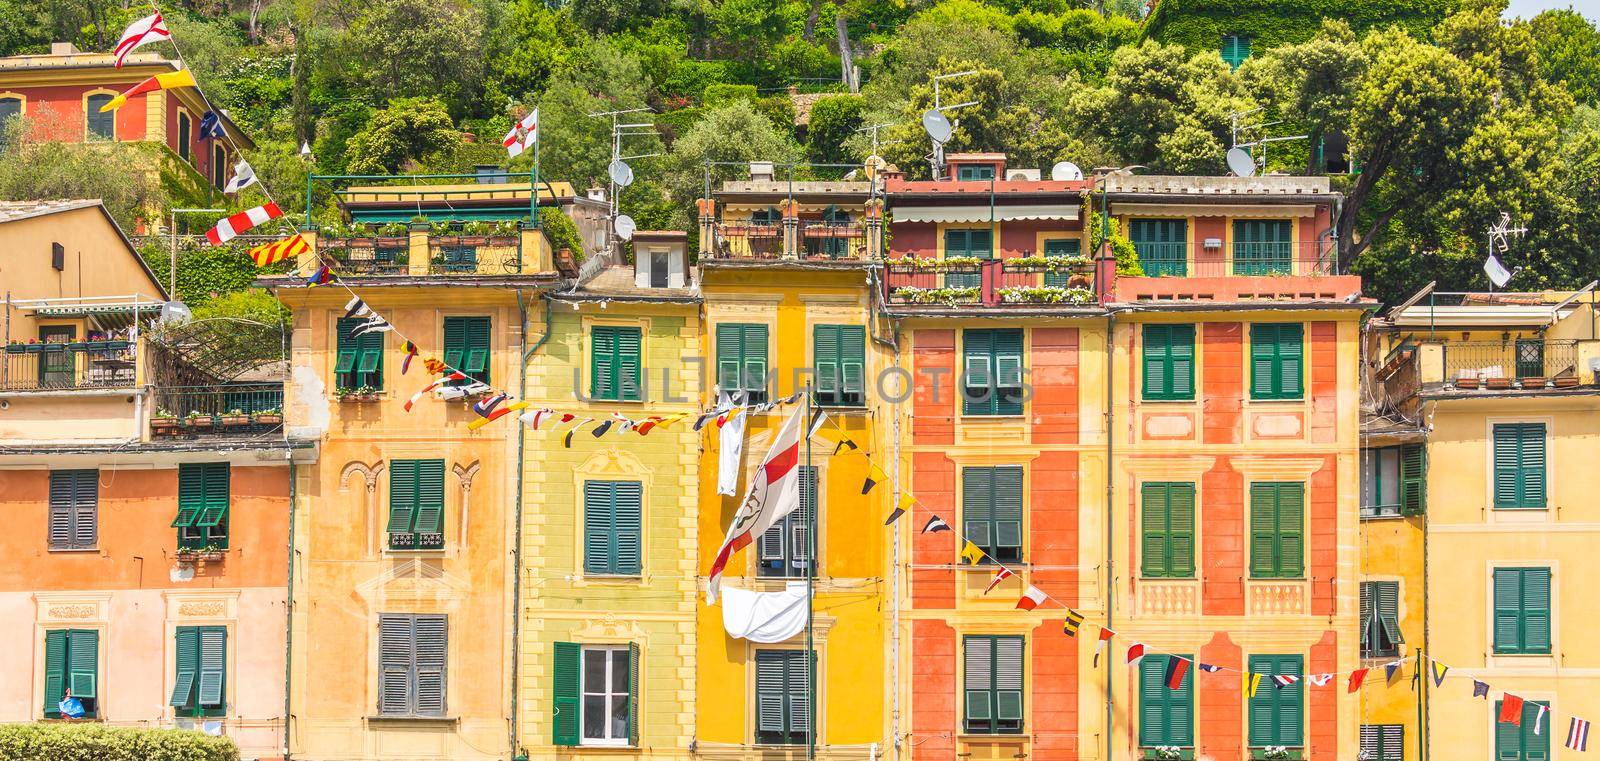 Exterior of colorful houses in Portofino Italy by Mariakray